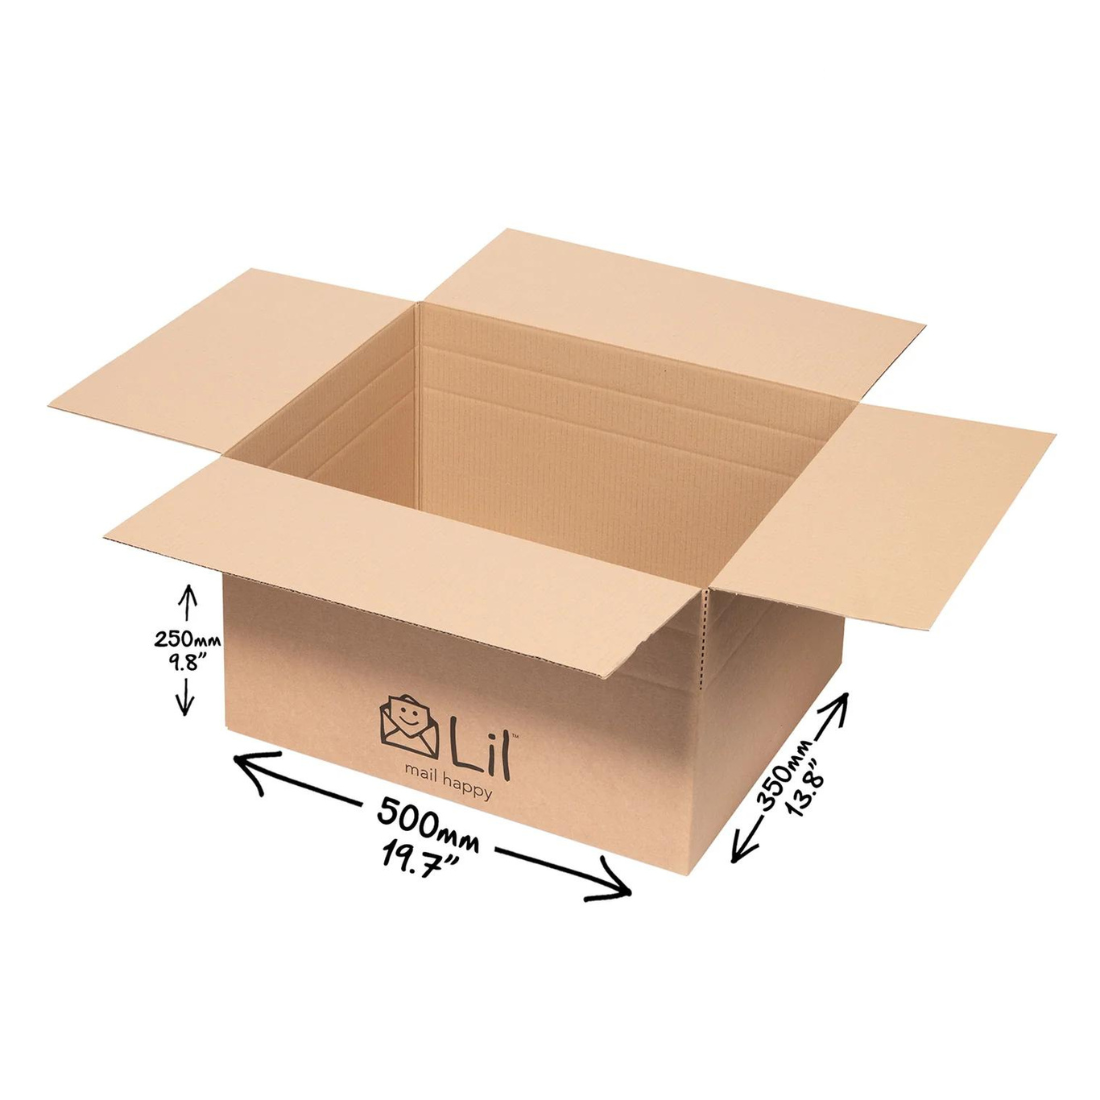 K10 Single Walled Cardboard Box - Fits 90% of all 4 slice toasters, coffee machines, blenders, bread makers, slow cookers, PS4 and many other retail items (PACK OF 50)